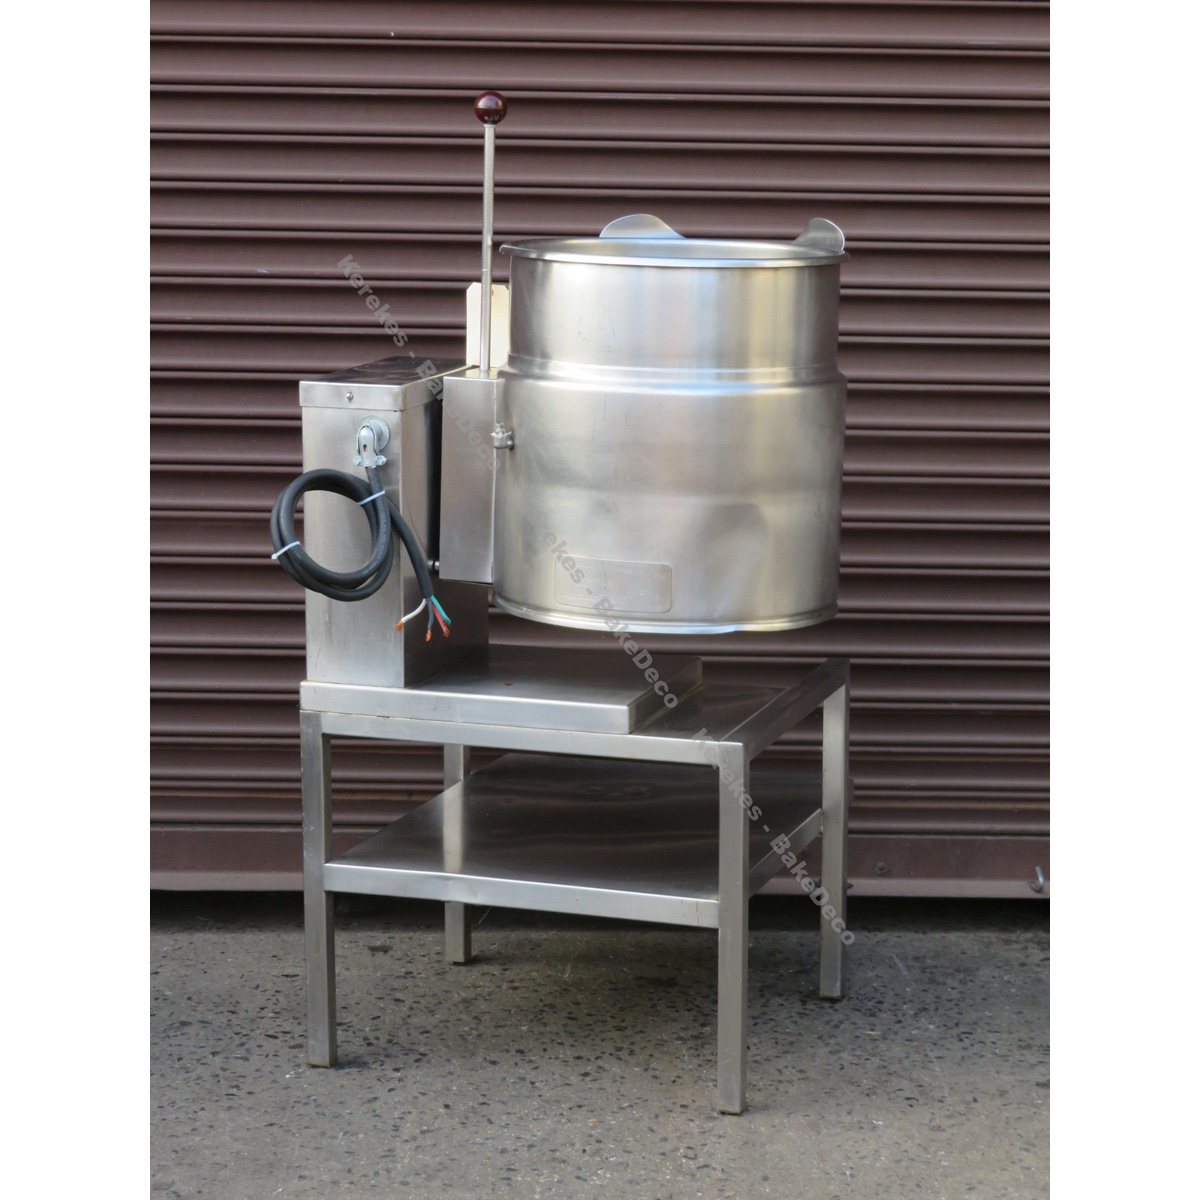 Cleveland Kettle 10 gal, Electric, KET-10T, Used Great Condition image 4